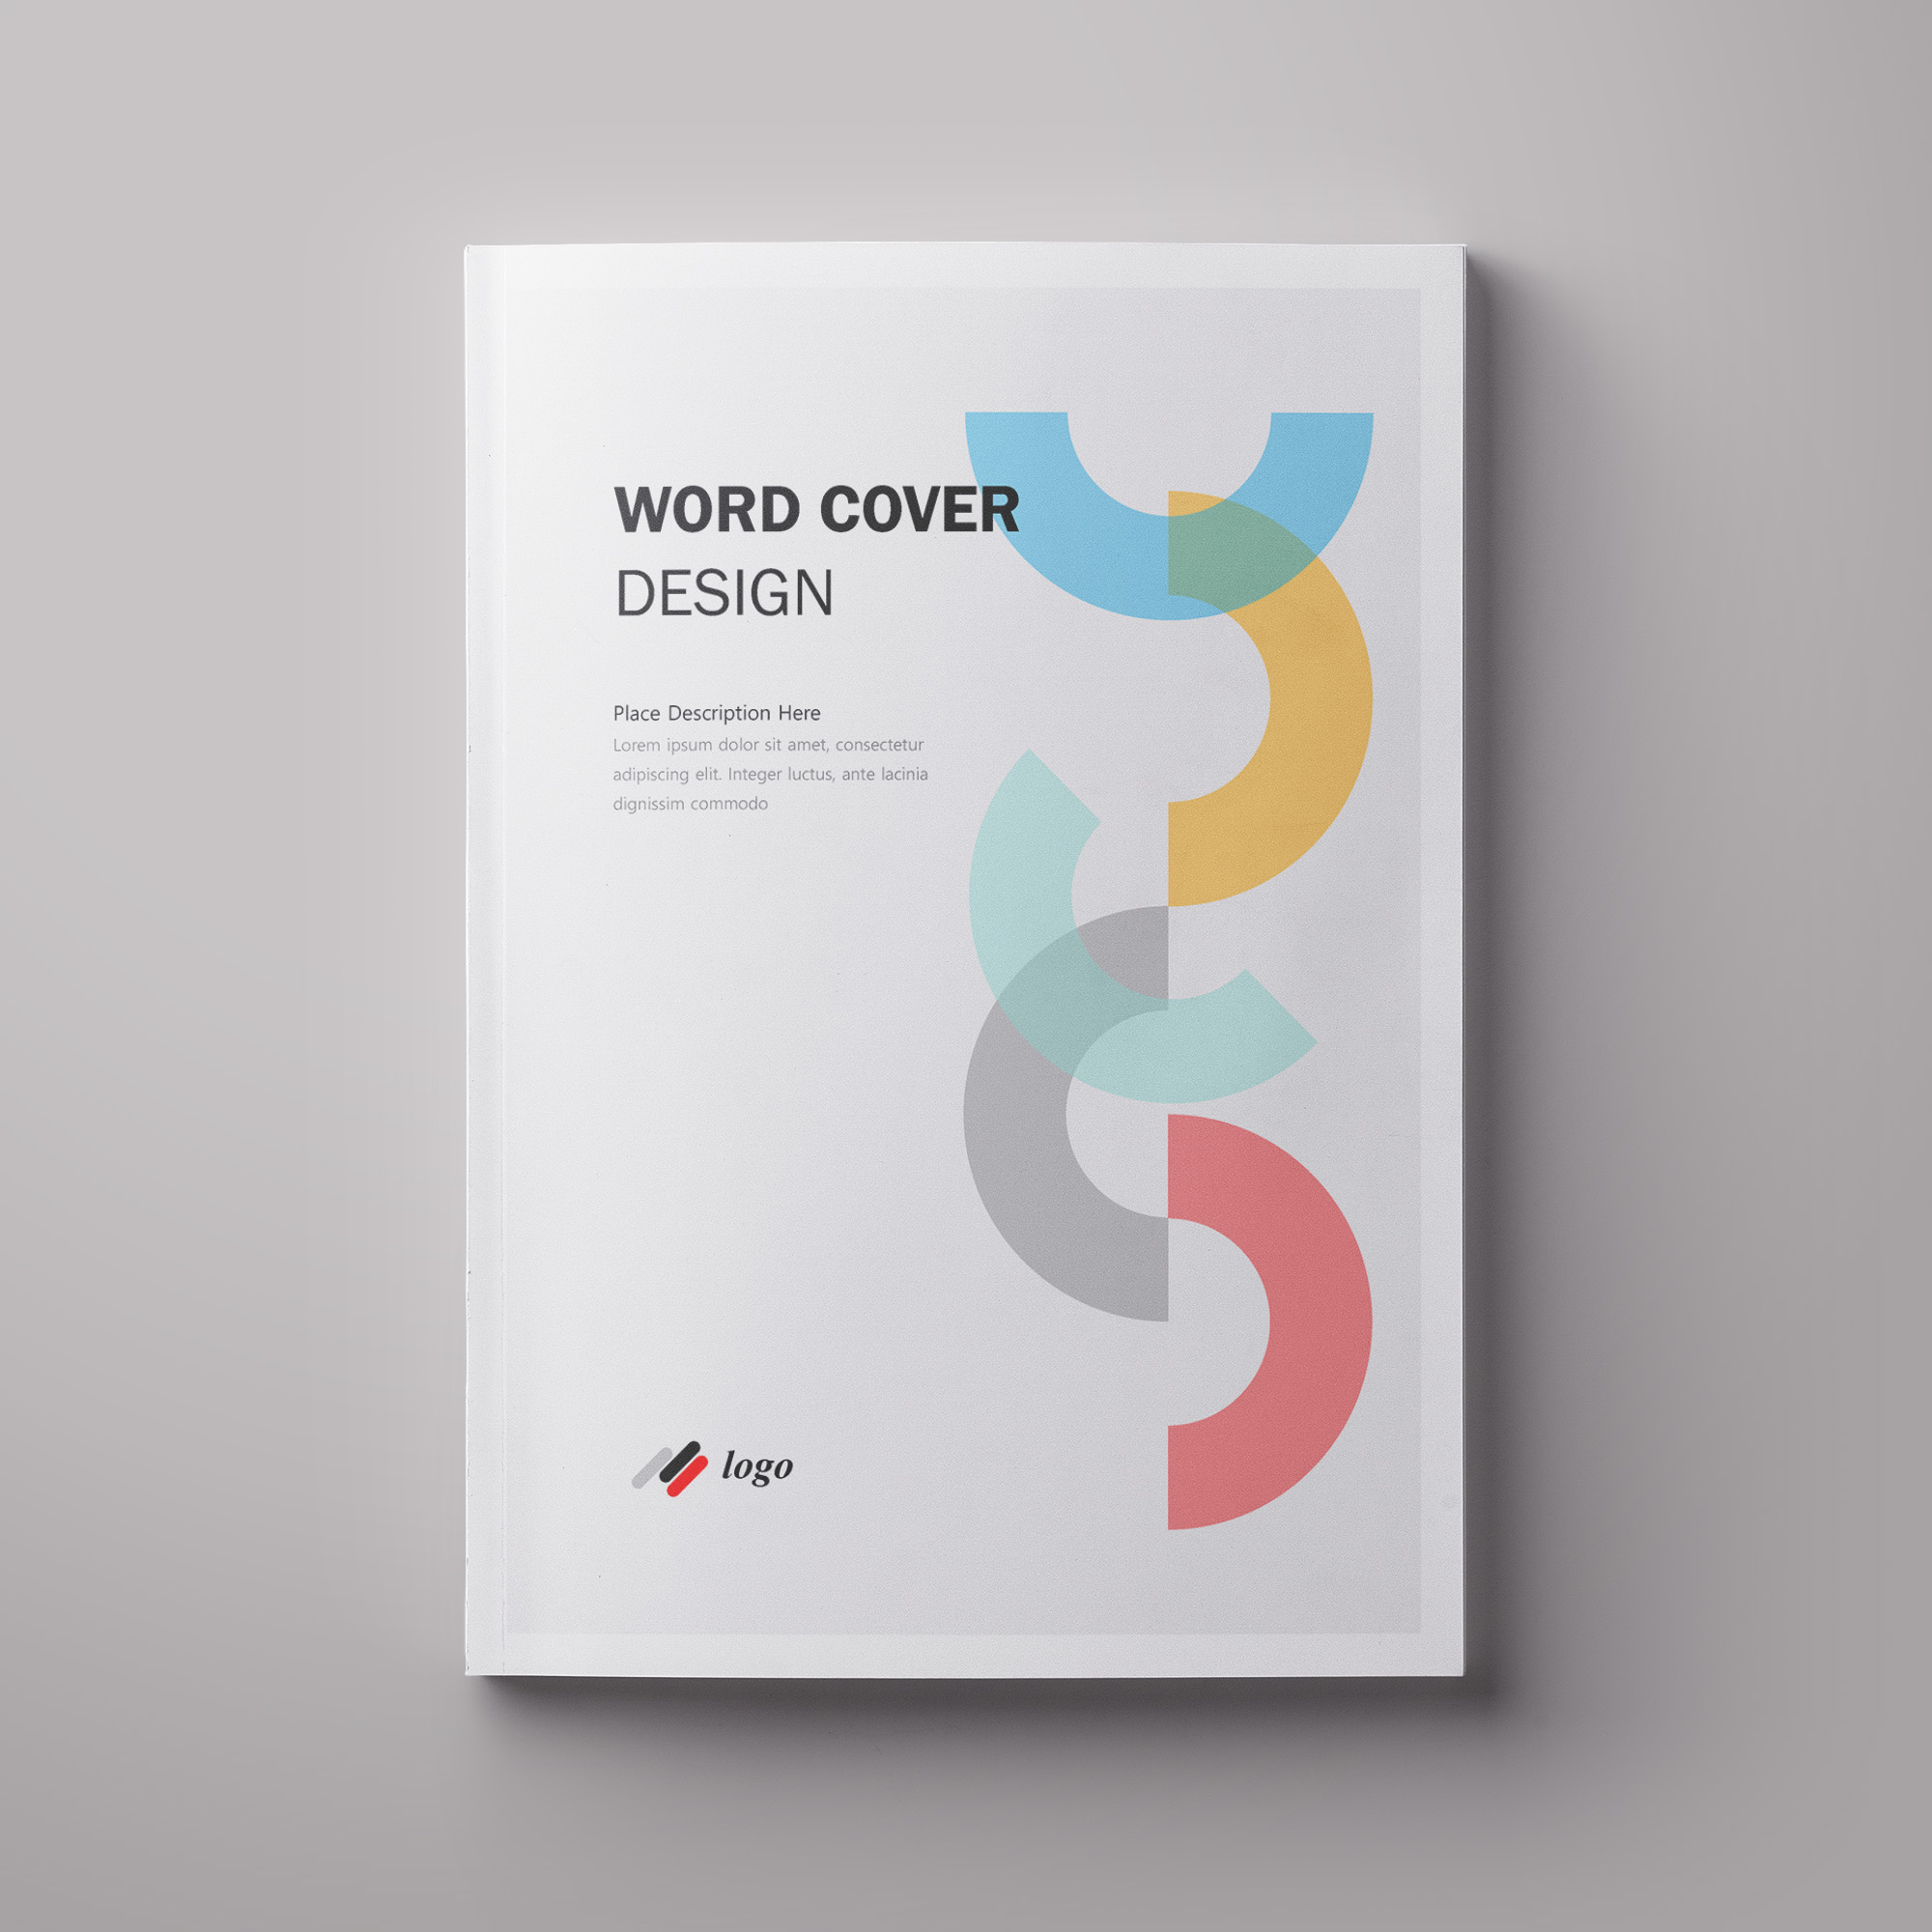 Ms Word Cover Page Design Free Download - Reverasite